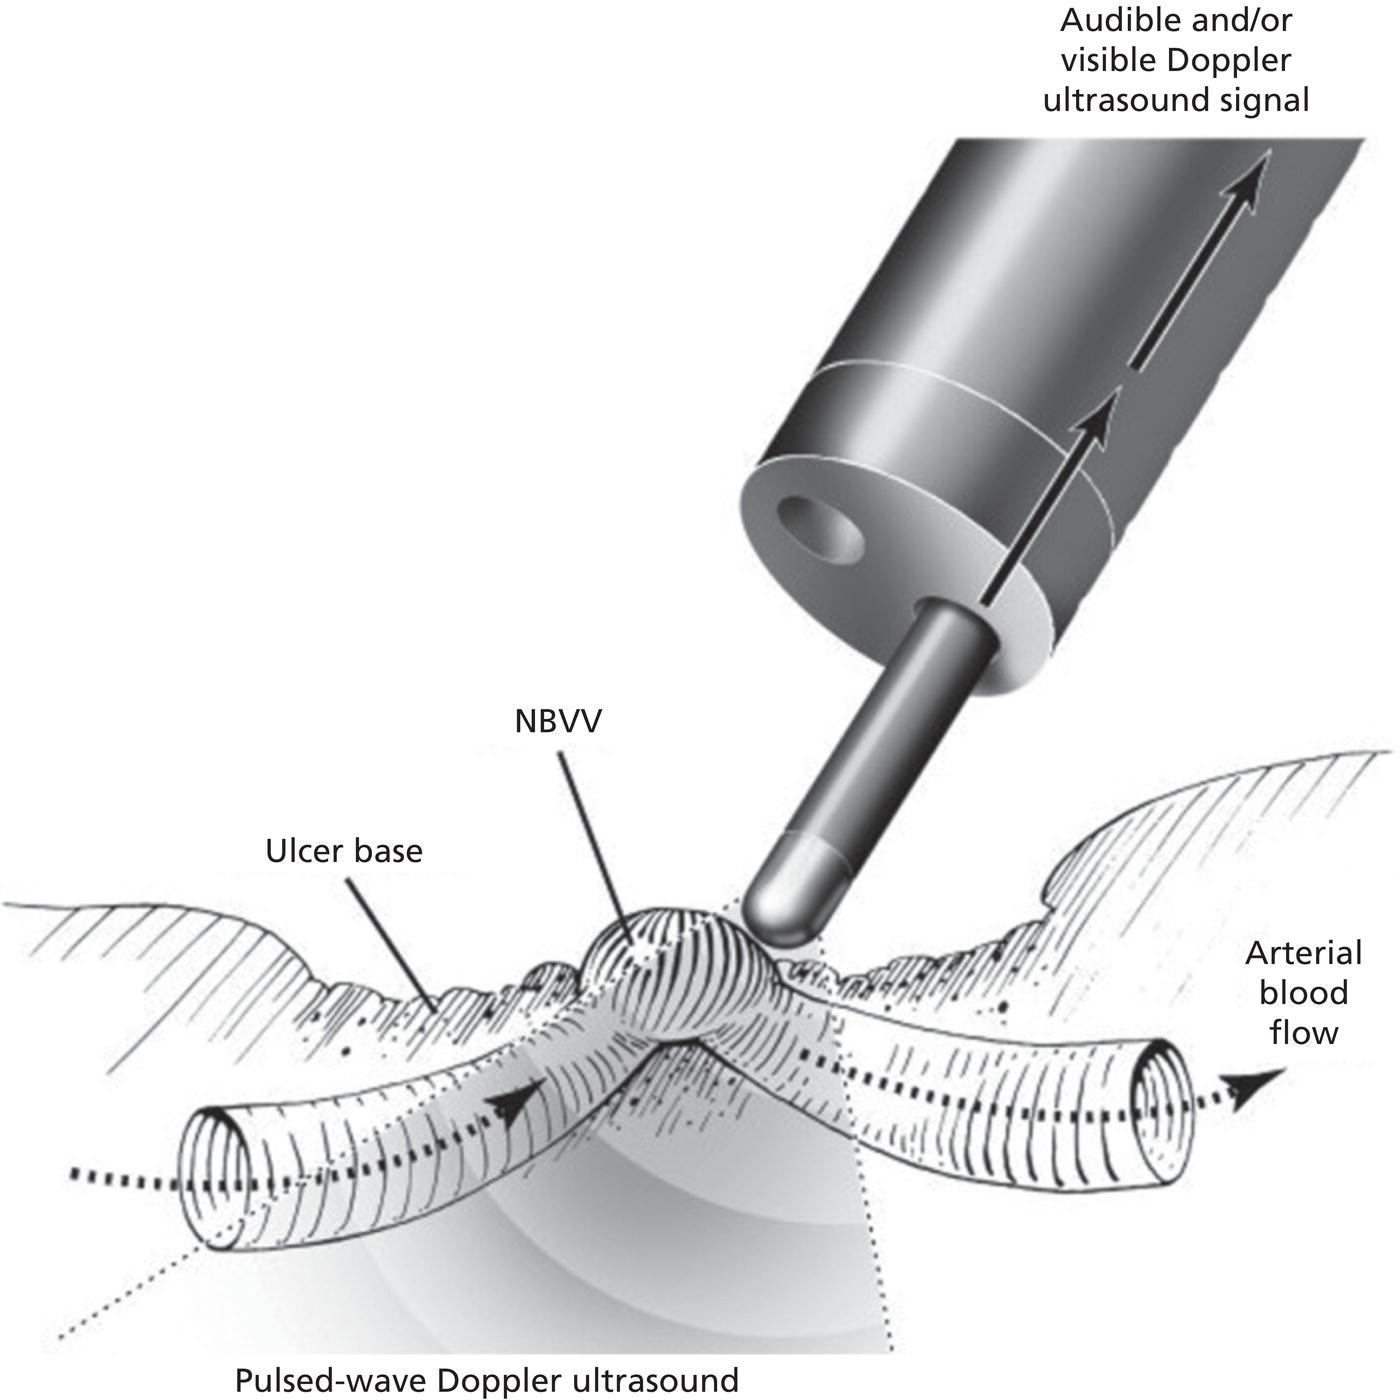 Schematic illustration of a bleeding peptic ulcer with a non-bleeding visible vessel (NBVV) undergoing Doppler ultrasound (DopUS) examination using an endoscopic DopUS probe that was passed via the accessory channel of a standard endoscope.